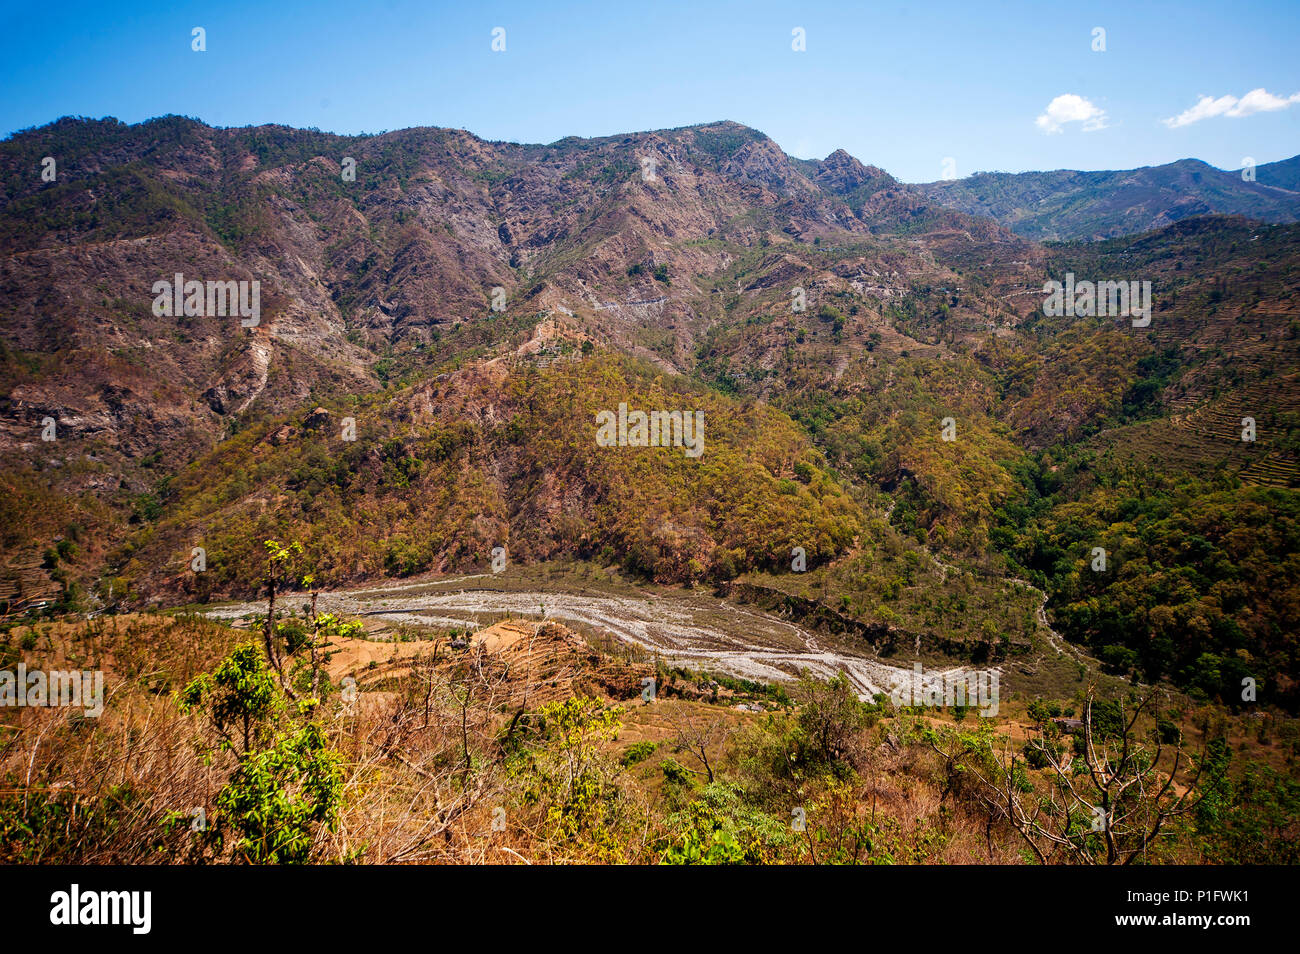 Mountains and villages on the remote Nandhour Valley, Kumaon Hills, Uttarakhand, India Stock Photo